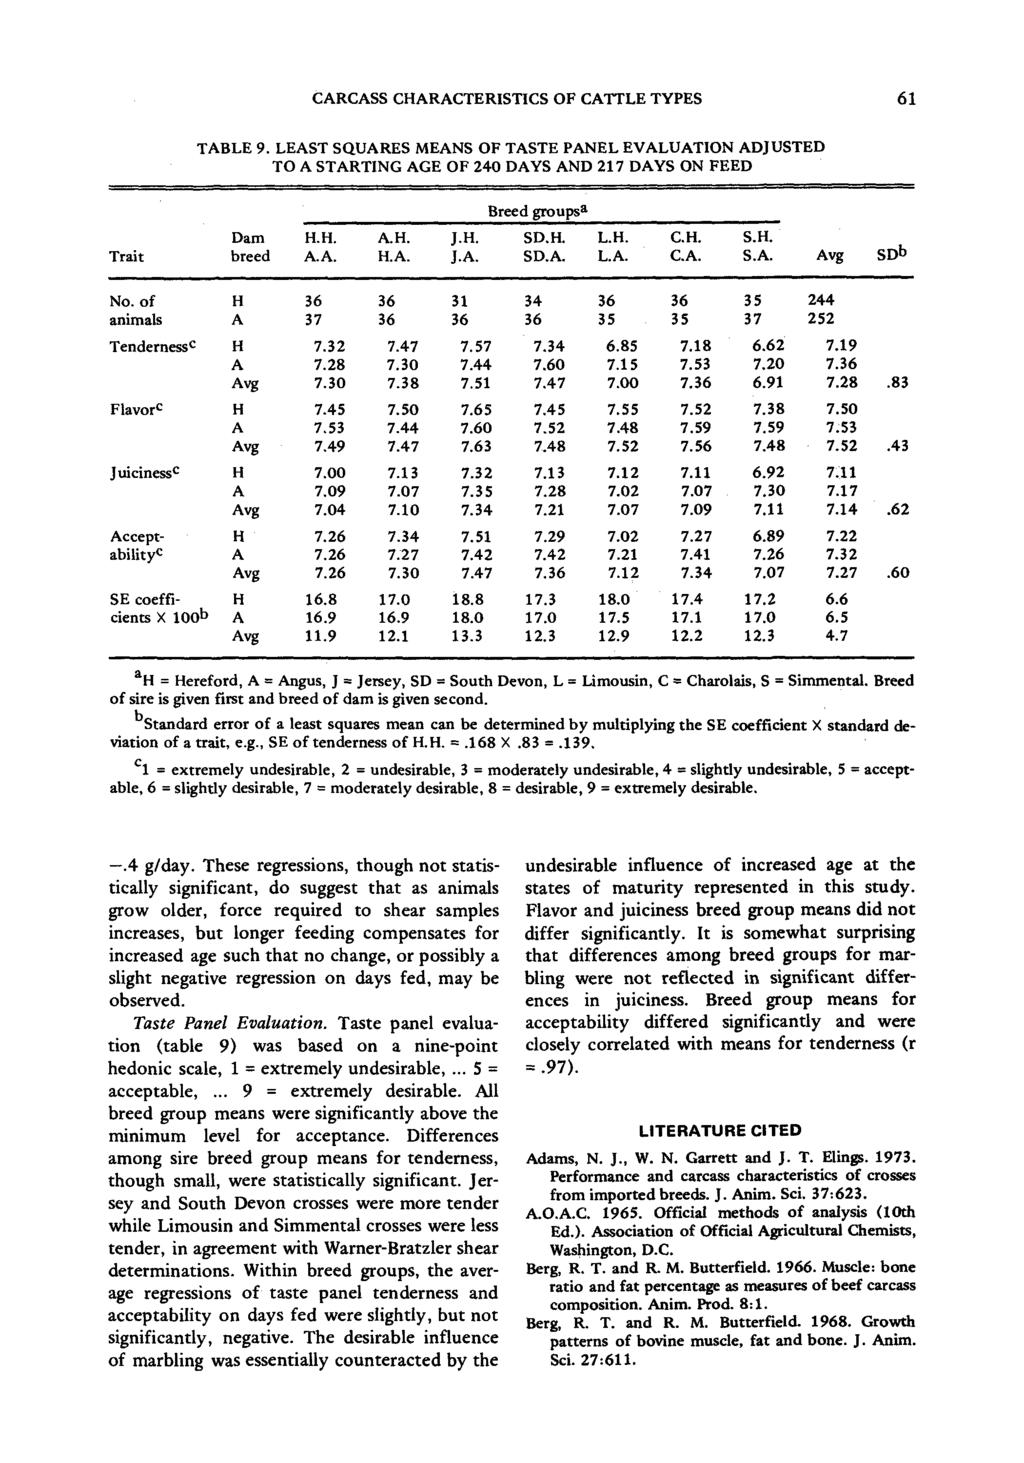 CARCASS CHARACTERISTICS OF CATTLE TYPES 61 TABLE 9. LEAST SQUARES MEANS OF TASTE PANEL EVALUATION ADJUSTED TO A STARTING AGE OF 240 DAYS AND 217 DAYS ON FEED Breed groups a Dam H.H. A.H. J.H. SD.H. L.H. C.H. S.H. Trait breed A.